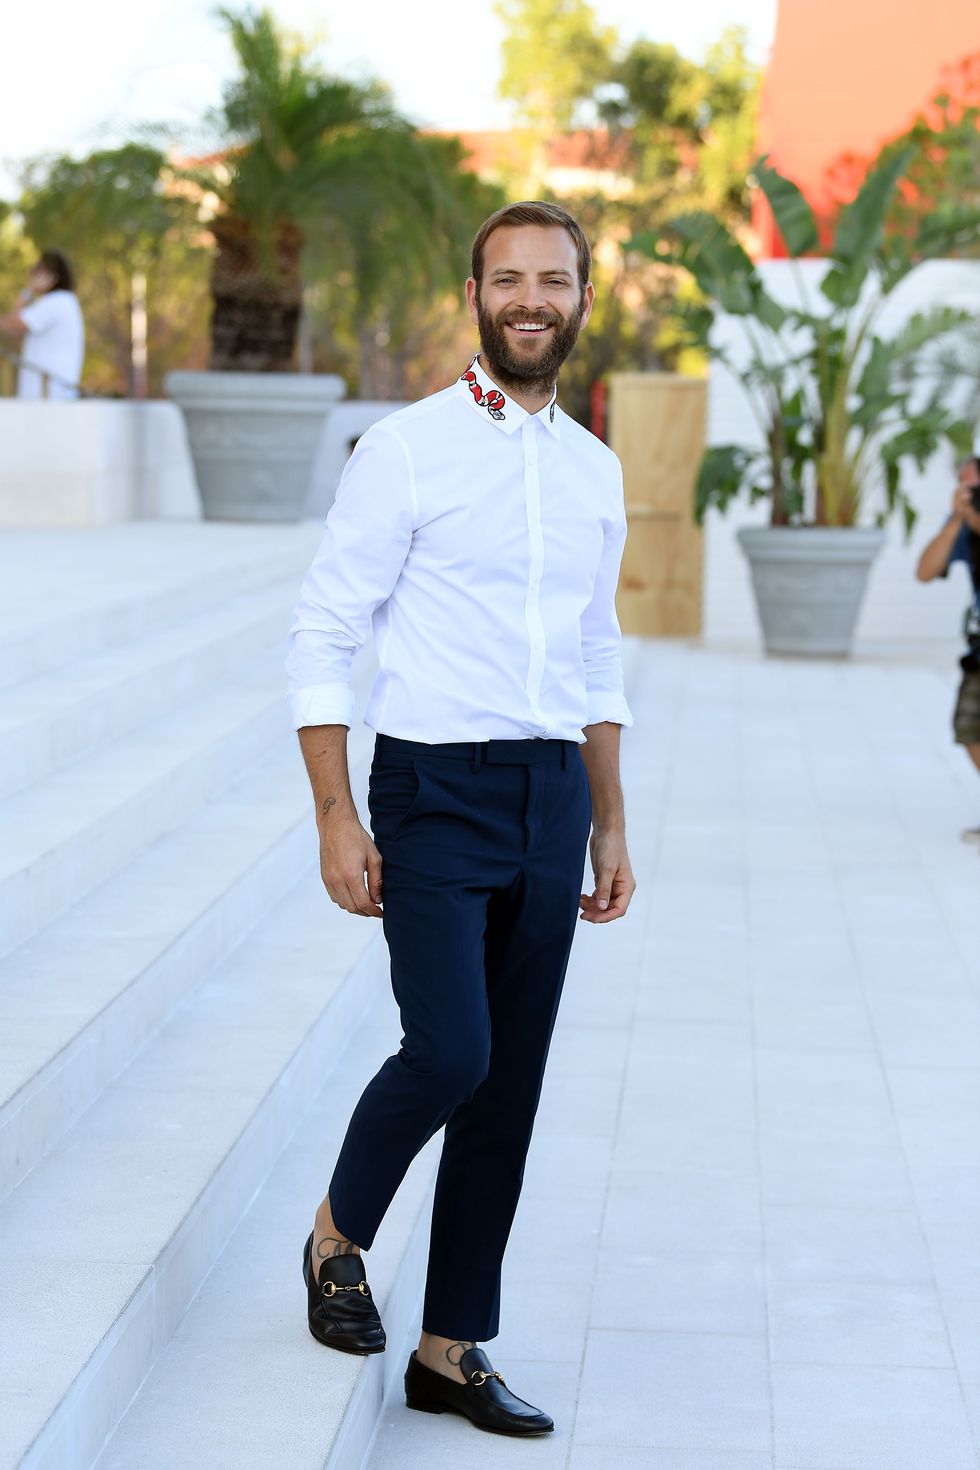 VENICE, ITALY - AUGUST 29:  Festival host Alessandro Borghi poses in front of the Palazzo Del Casino during the 74th Venice Film Festival at  on August 29, 2017 in Venice, Italy.  (Photo by Venturelli/WireImage)